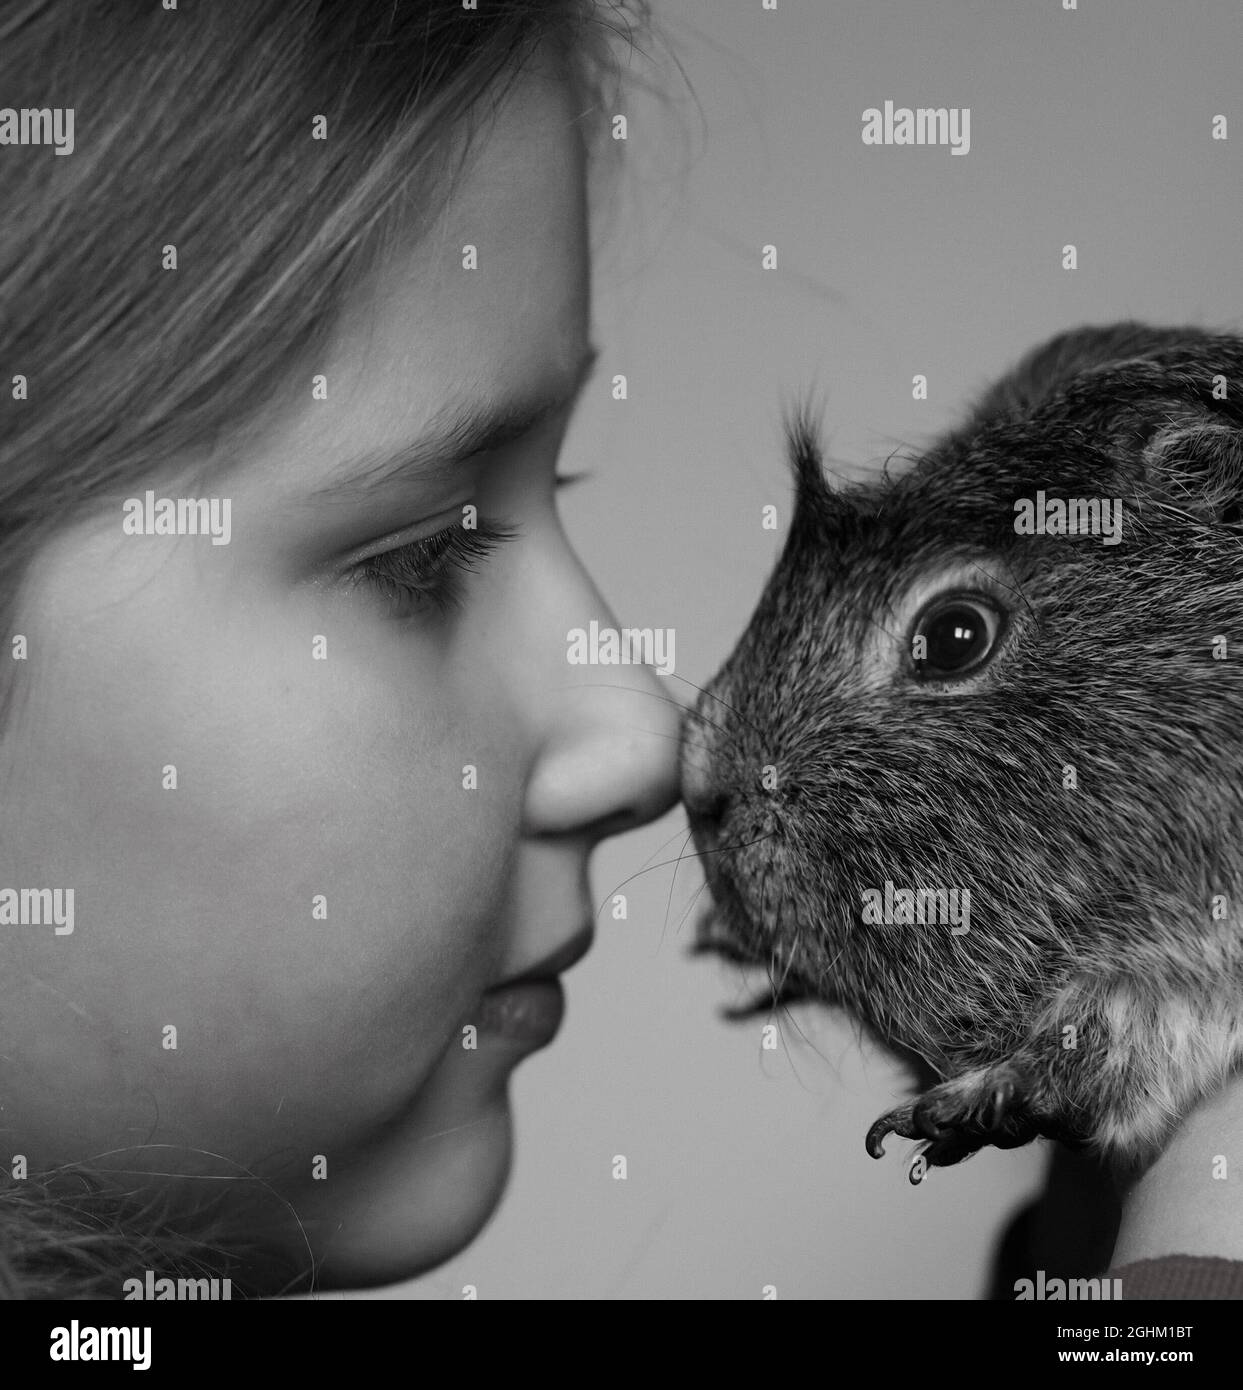 Little girl touching her nose guinea pig nose. Selective focus. Black and white. Stock Photo